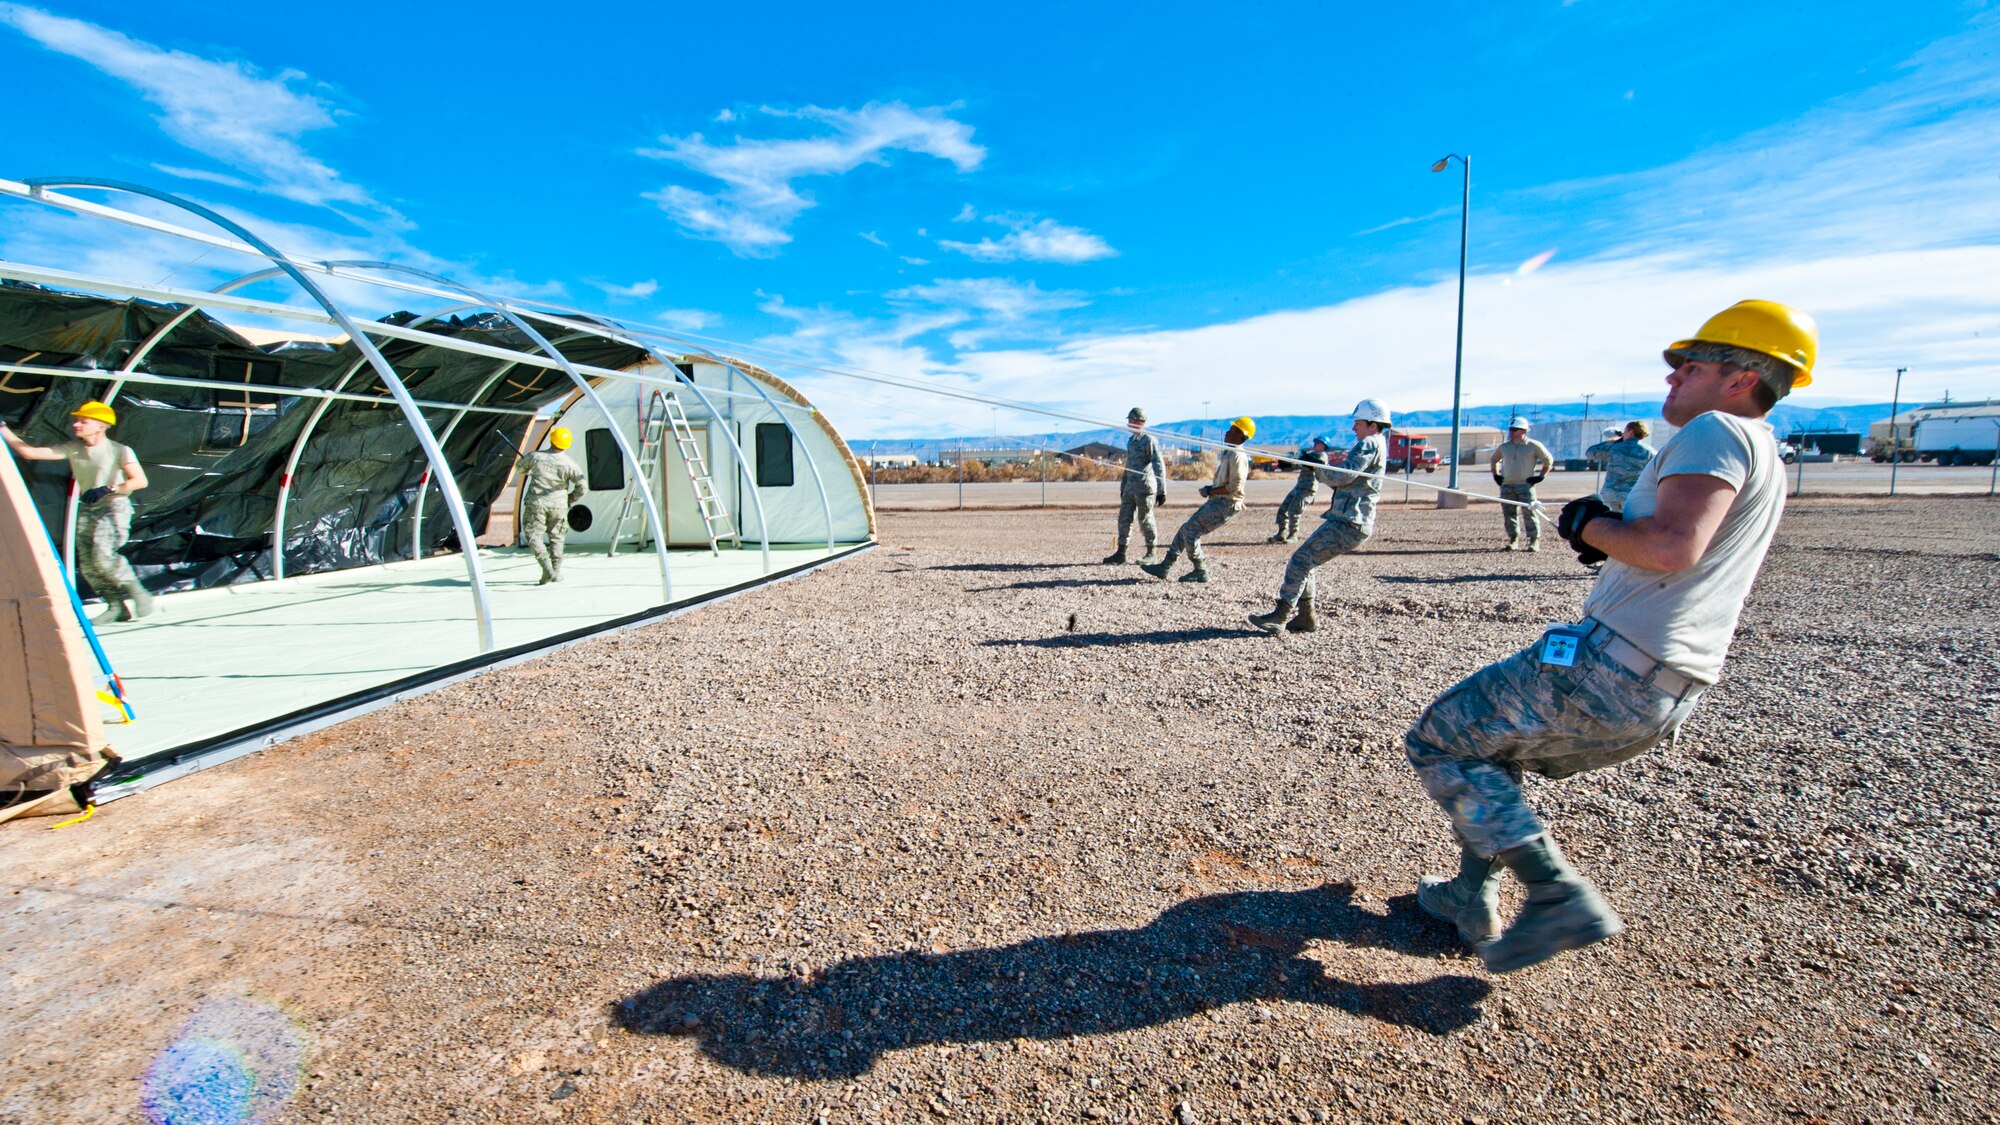 49th Materiel Maintenance Squadron structures Airmen work to construct a Small Shelter System at Holloman Air Force Base, N.M., Dec. 2. The Airmen trained on building fully-ventilated structures such as the SSS to maintain skills needed during construction in deployed environments. The 49th MMS accomplishes the mission by sending large, all-inclusive packaged equipment to deployed locations or to areas impacted by natural disasters. (U.S. Air Force photo by Senior Airman Daniel E.Liddicoet/Released)